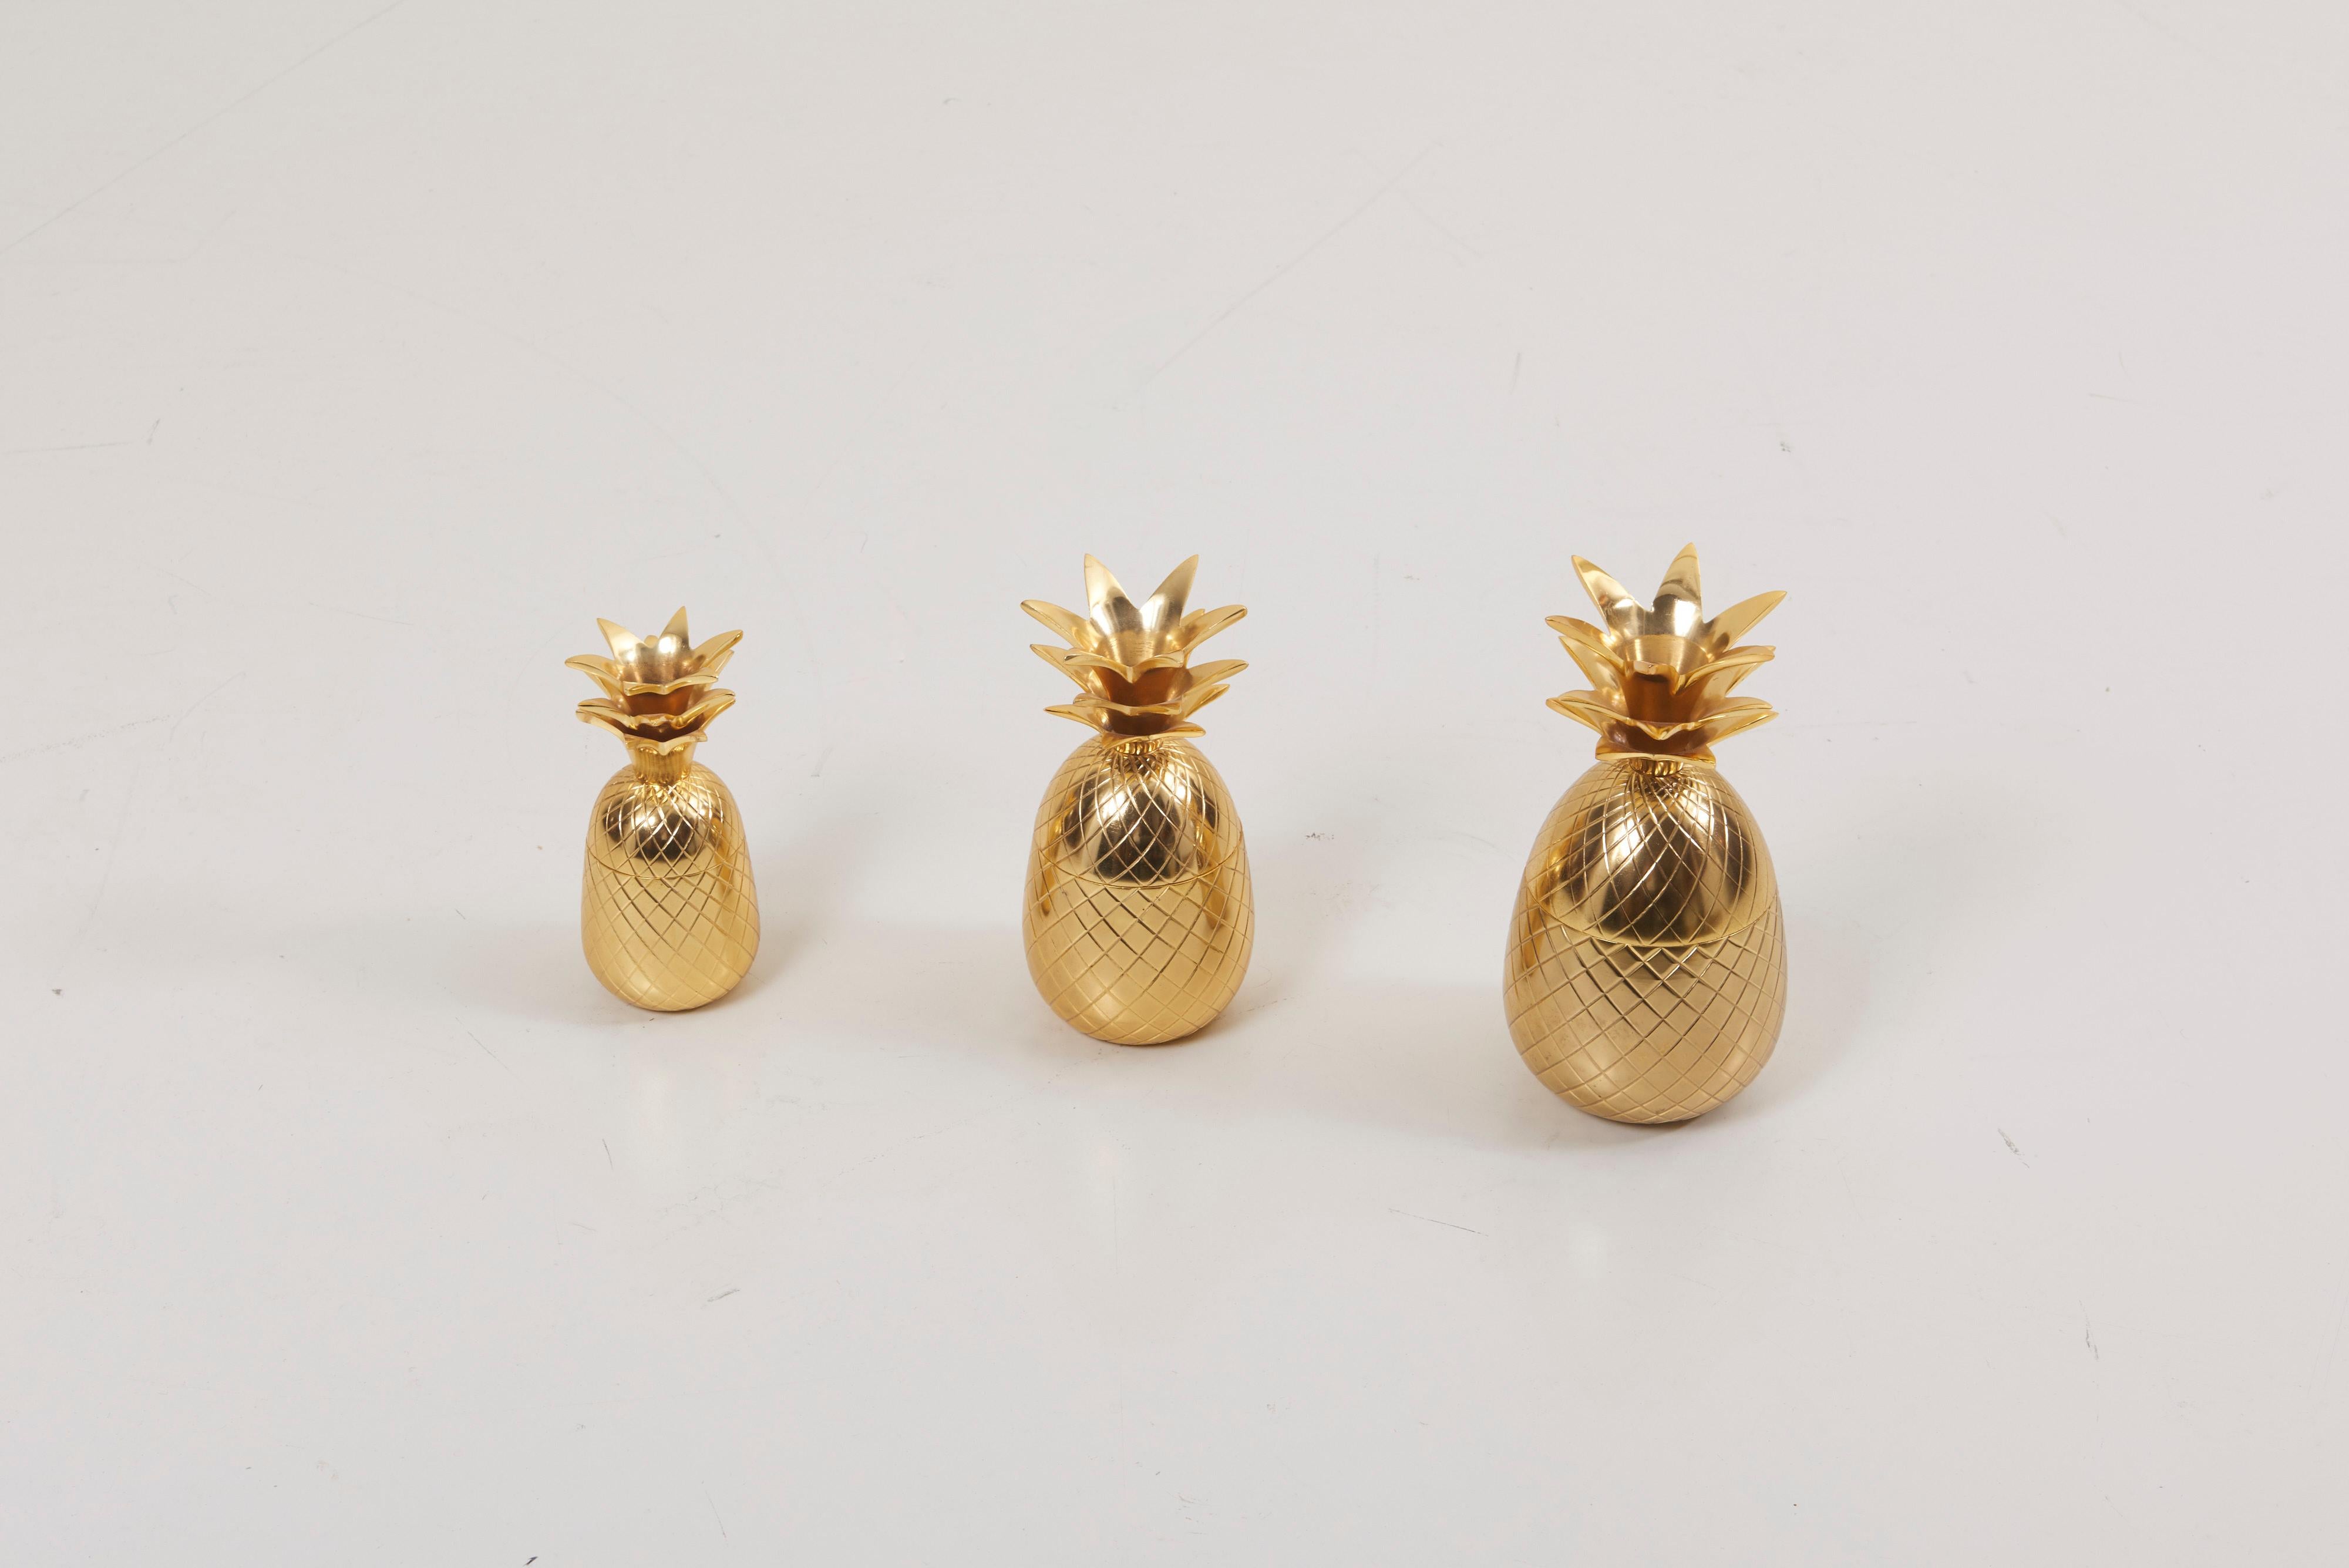 Wonderful set of 3 brass pineapple ice bucket, trinket or candy boxes.